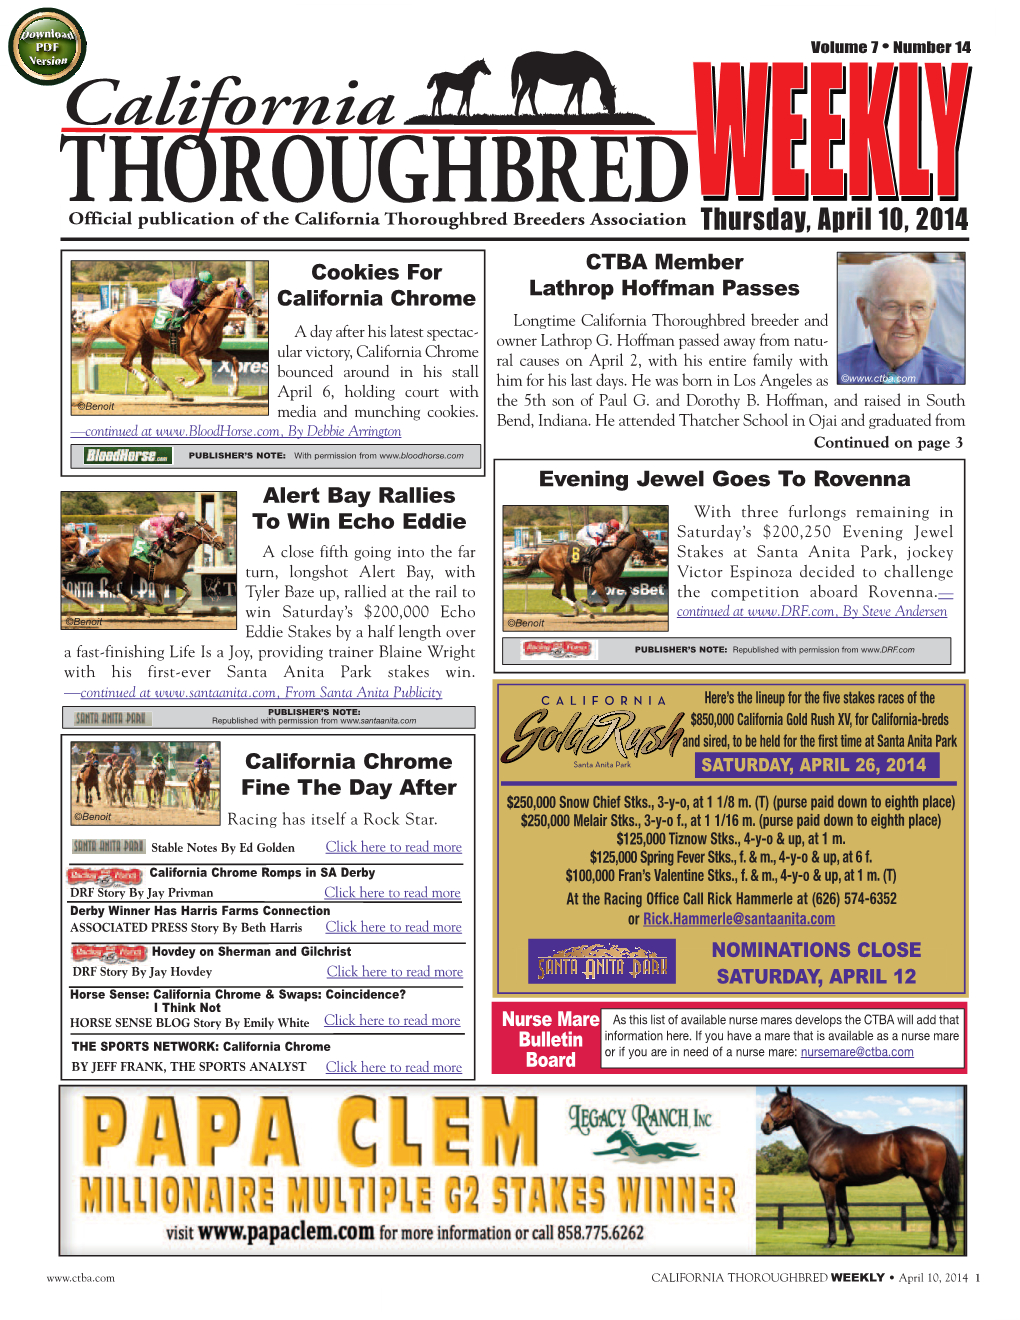 California Thoroughbred Weekly for Wednesday, 4-9-2014 4/10/14 10:38 AM Page 4